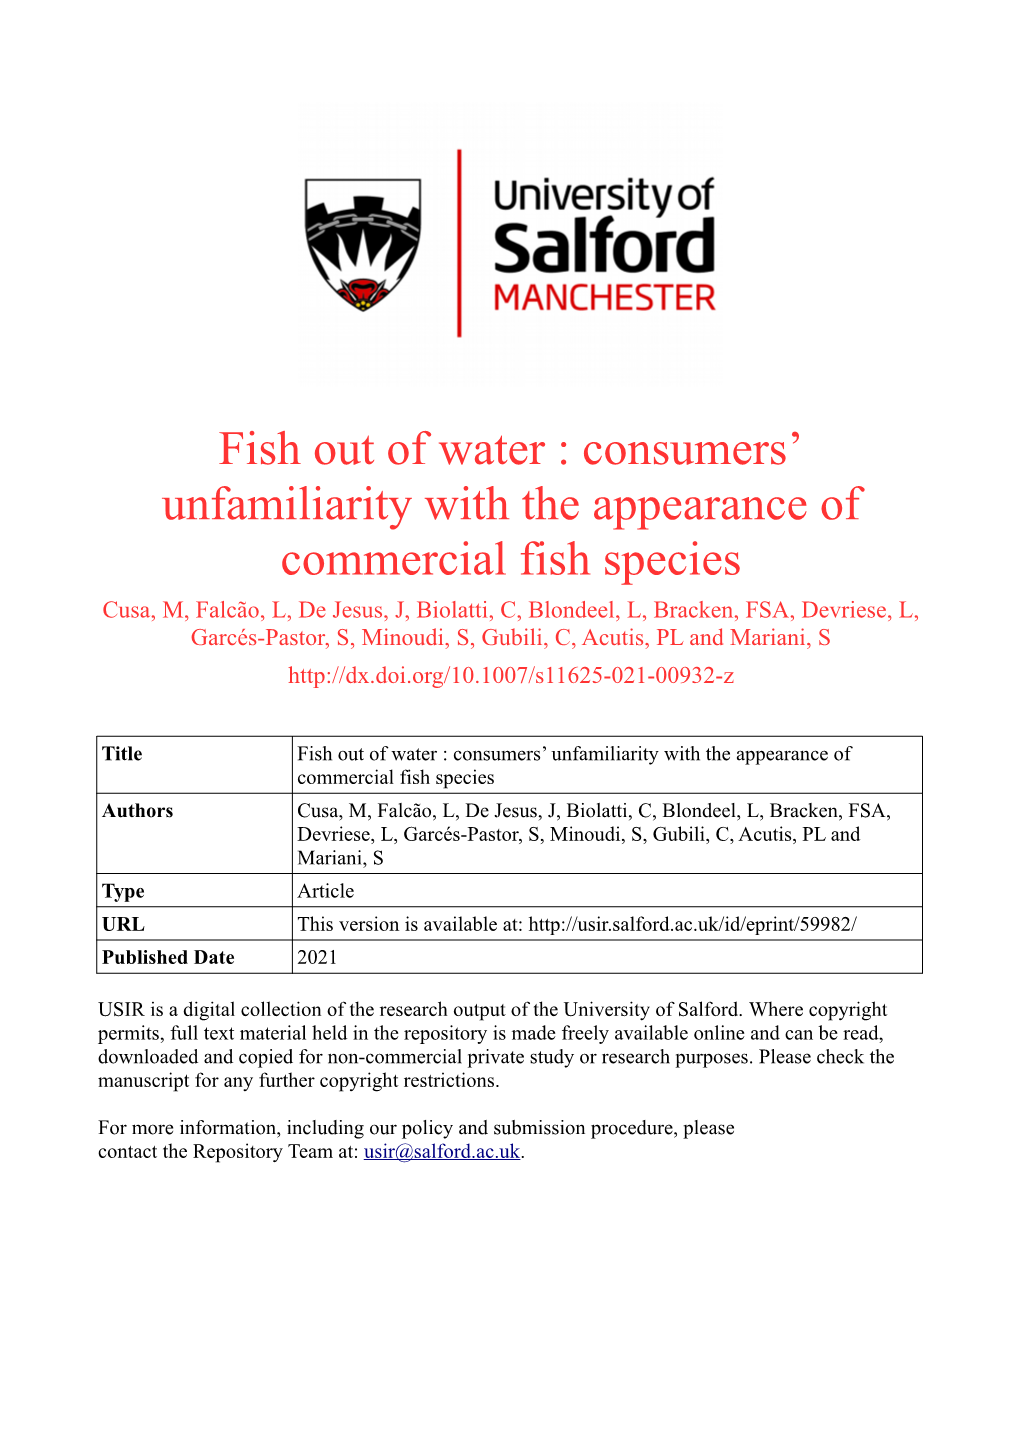 Consumers' Unfamiliarity with the Appearance of Commercial Fish